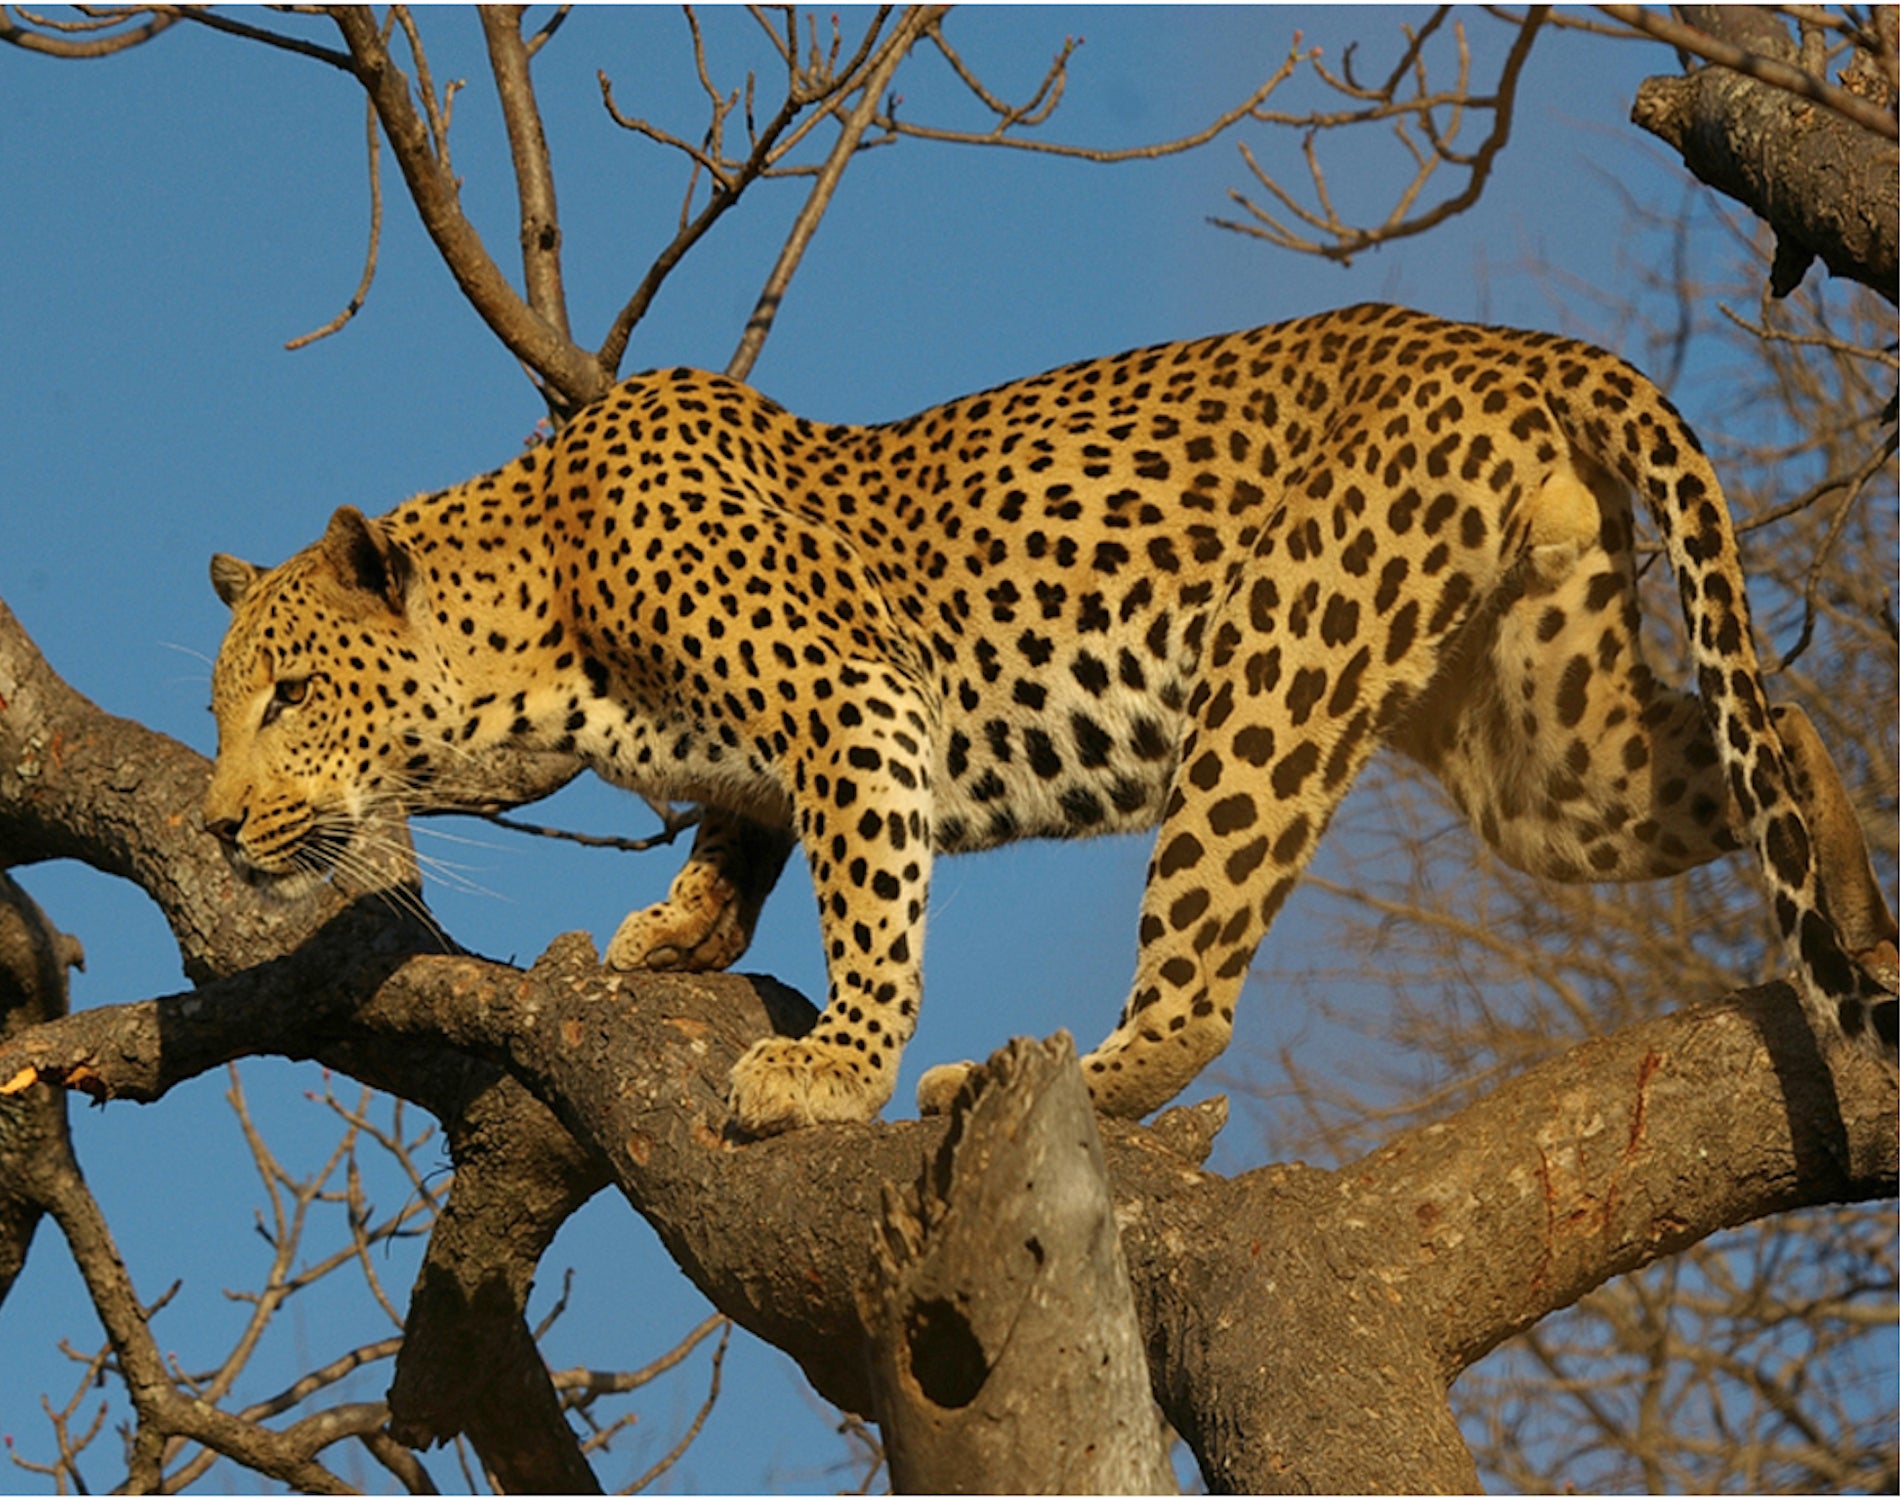 The African leopard on the hunt, watching and waiting. One of Africa's Big Five wildlife, its survival has become of concern for conservationists